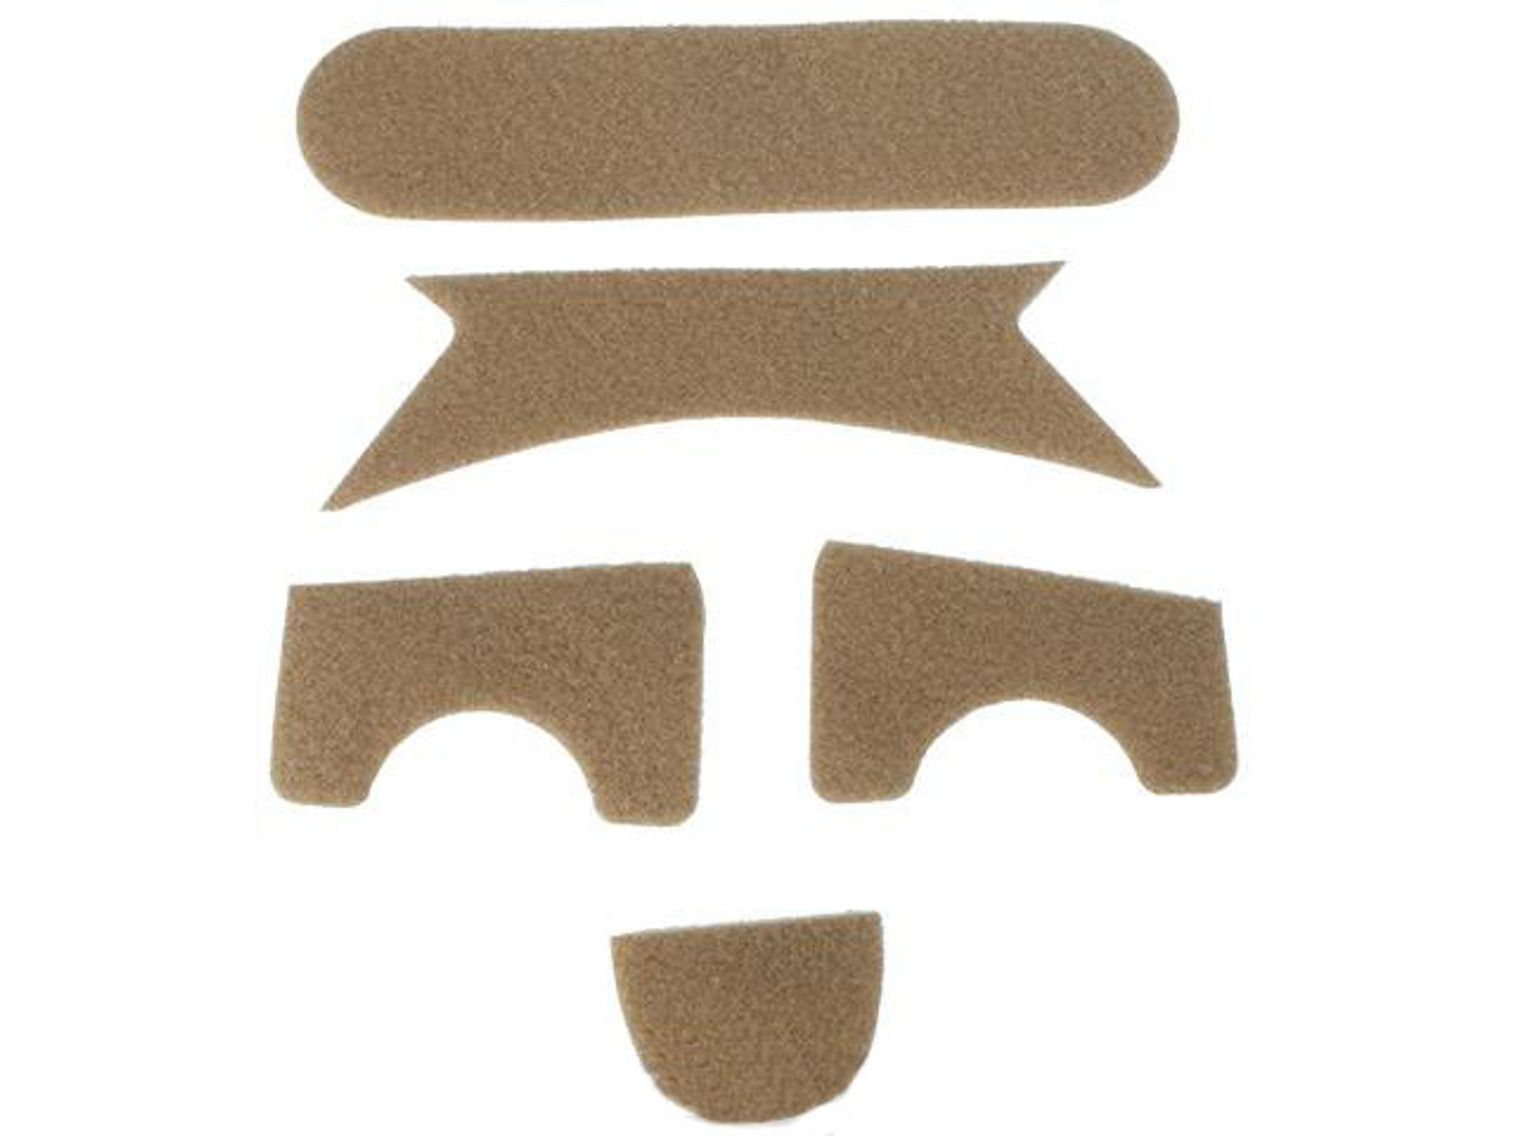 EmersonHook and Loop Adhesive Strips for MICH Type Helmets - Tan